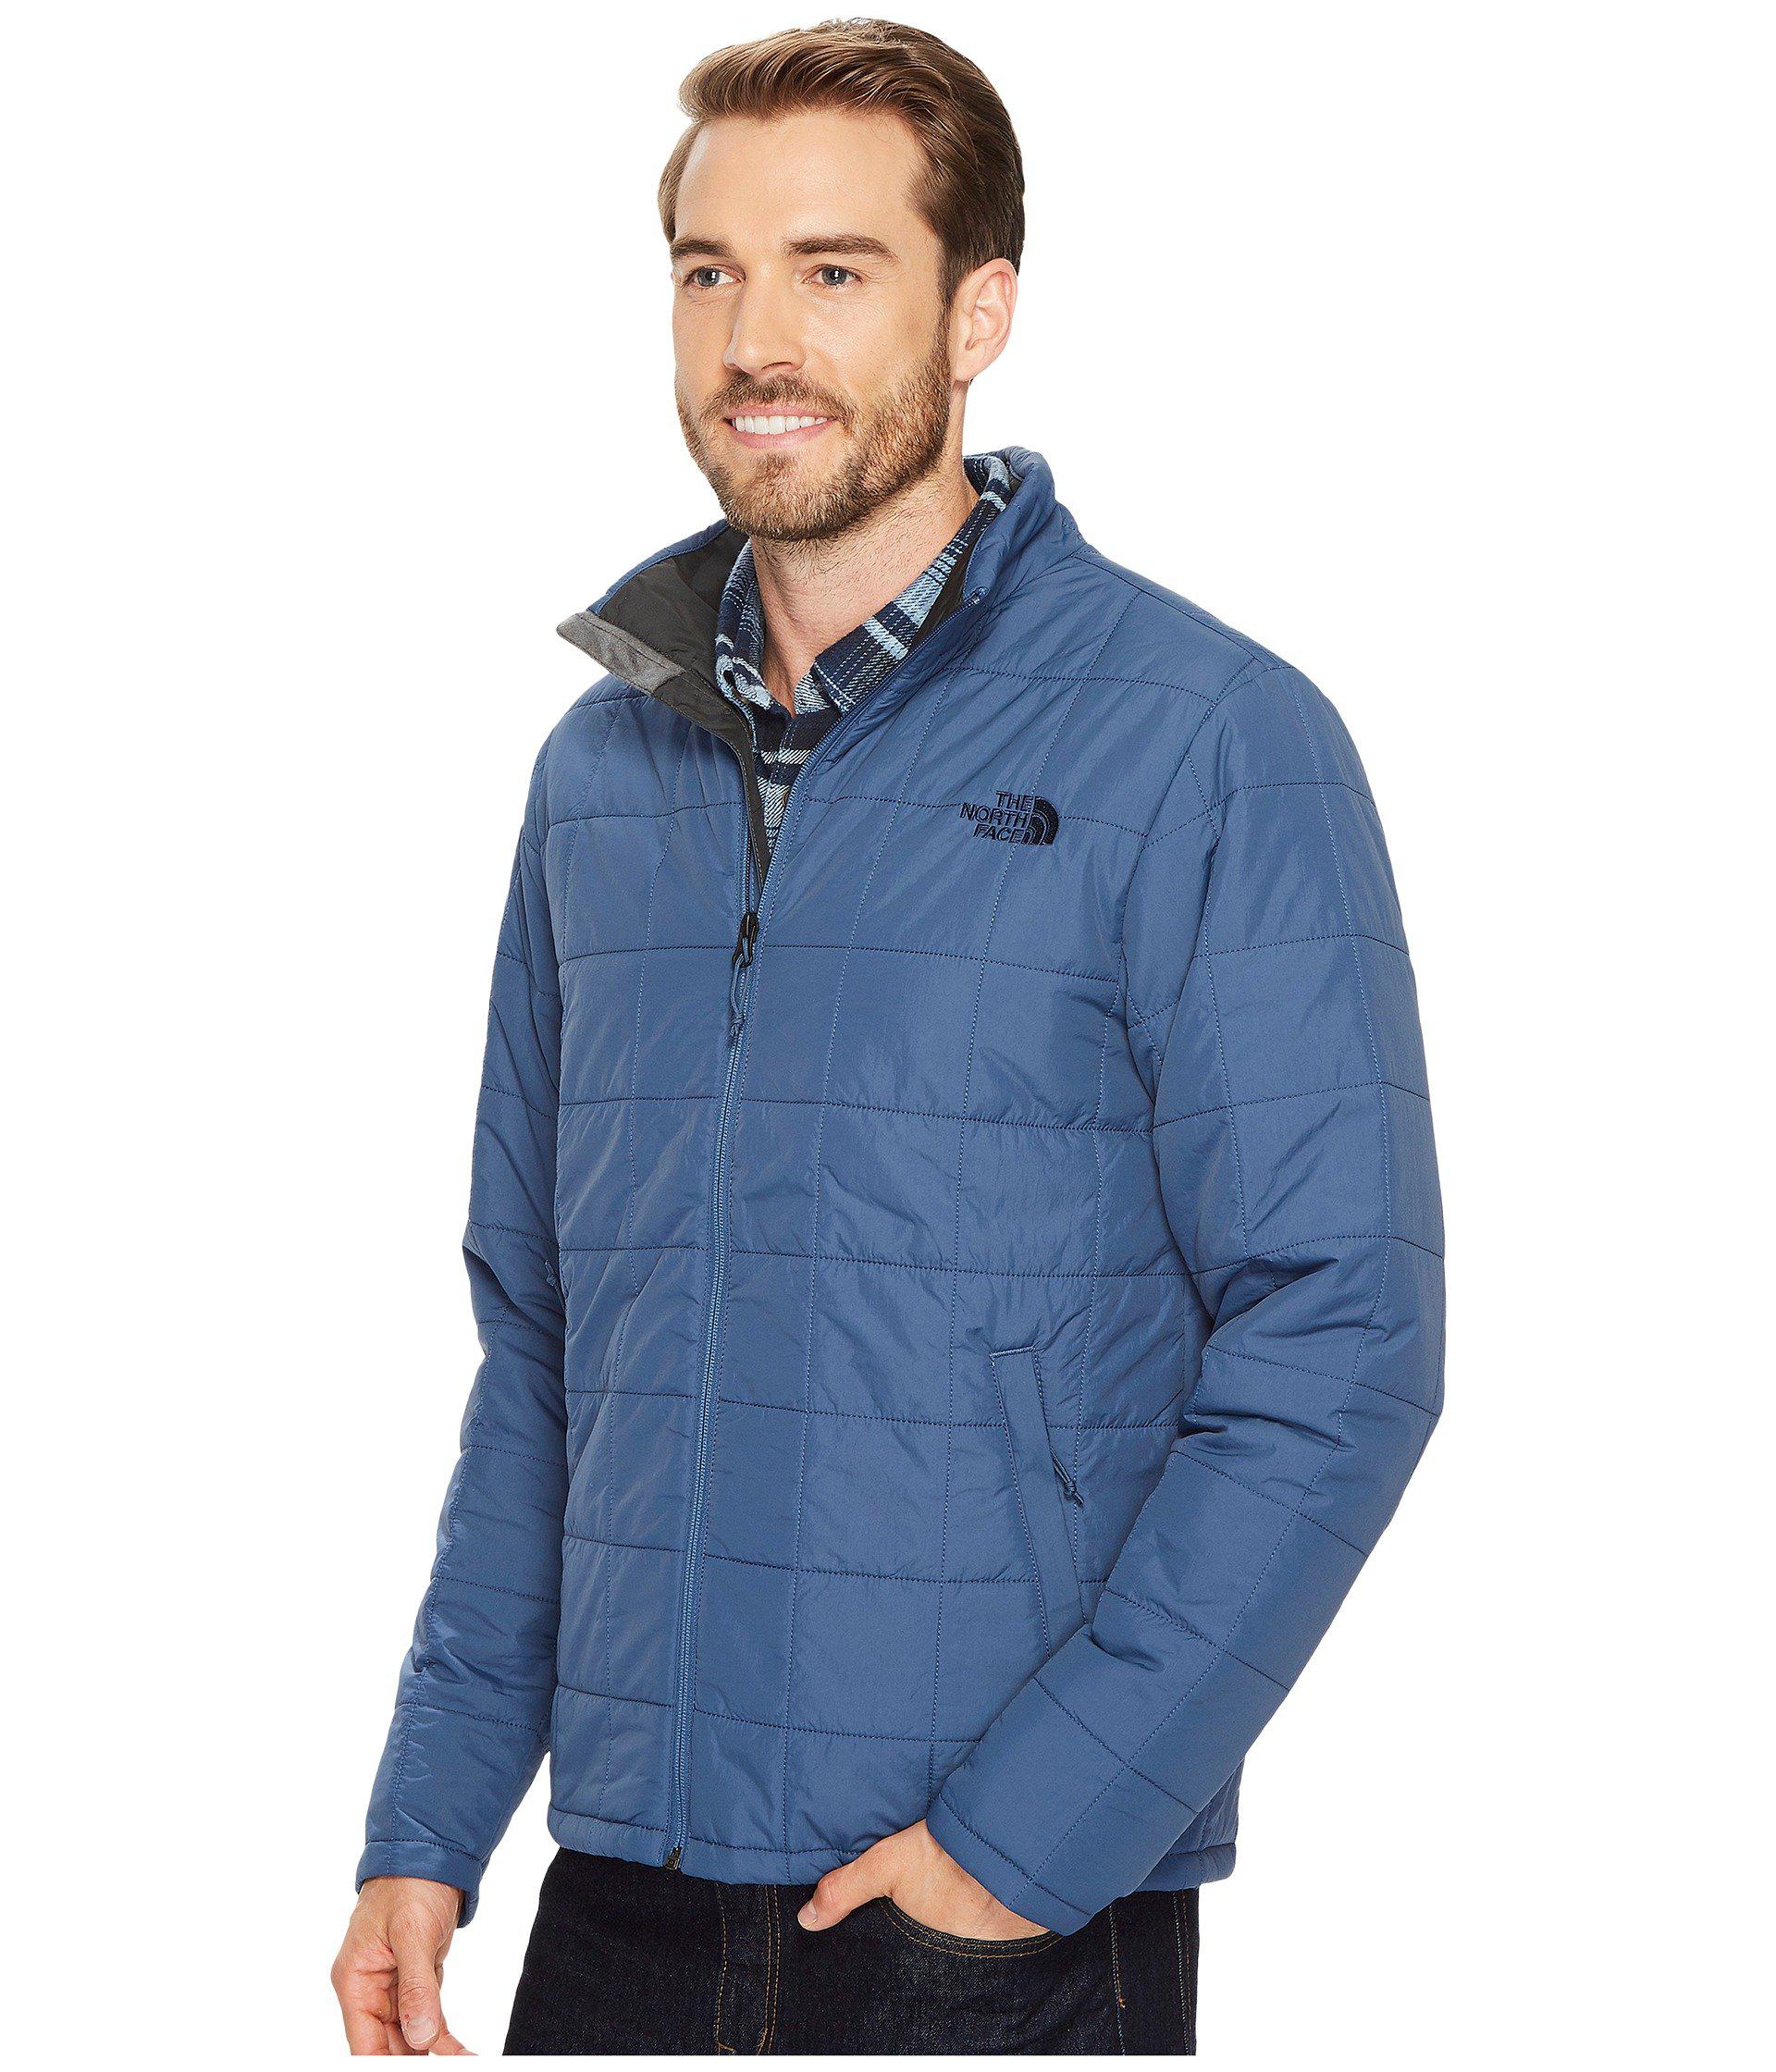 the north face men's harway jacket 